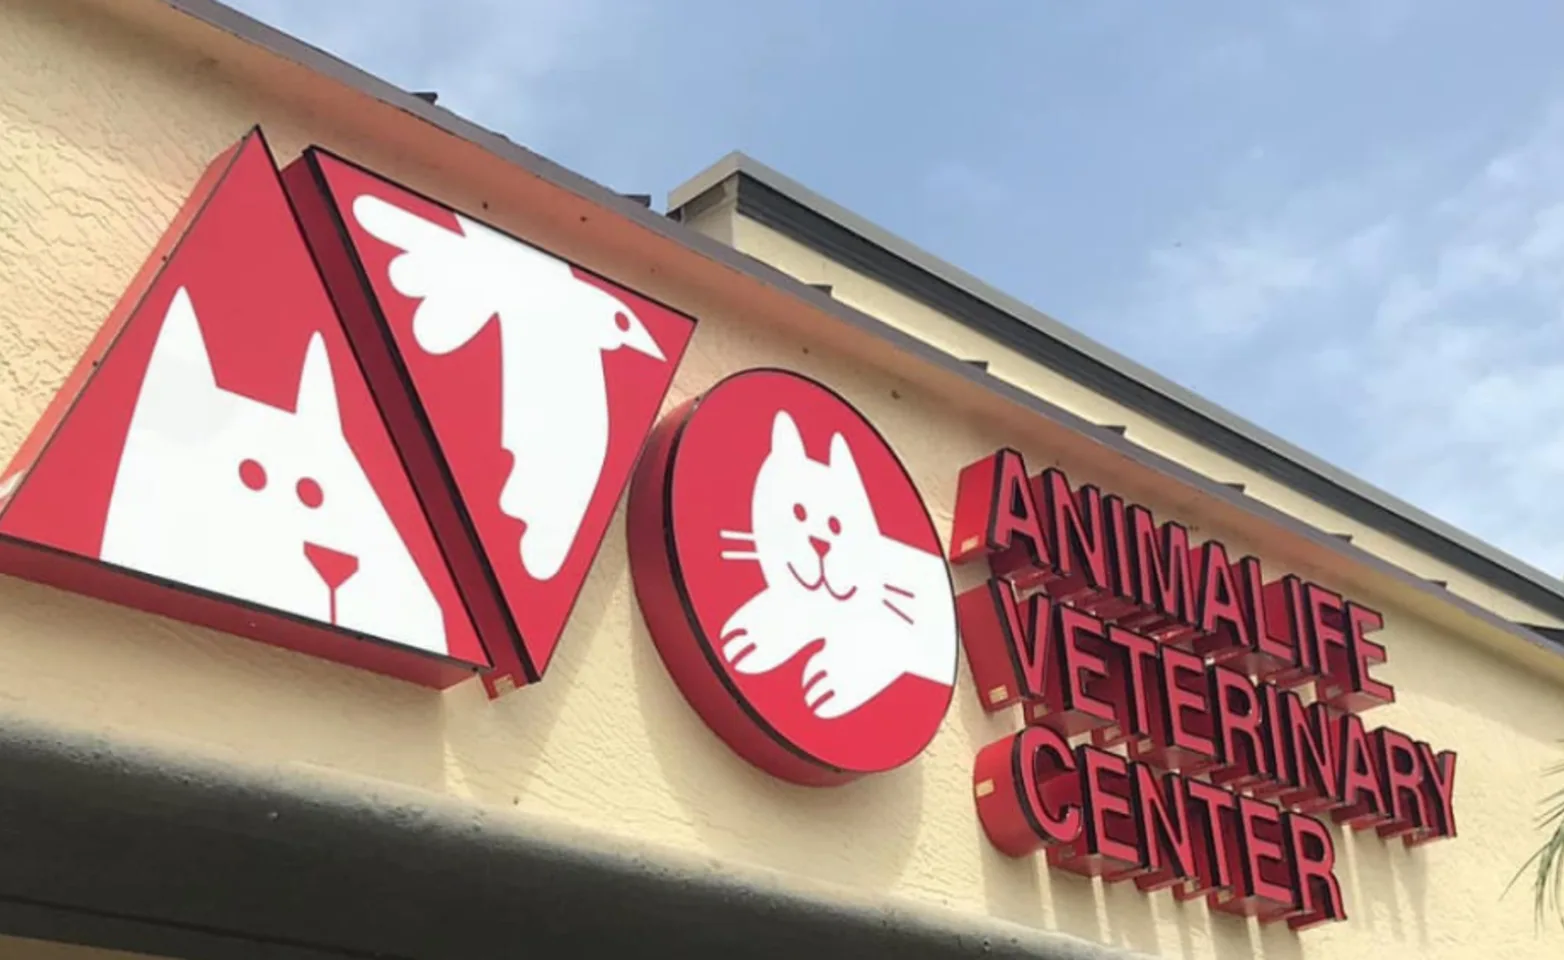 The Animalife Veterinary Center at Eagle Creek Exterior Sign